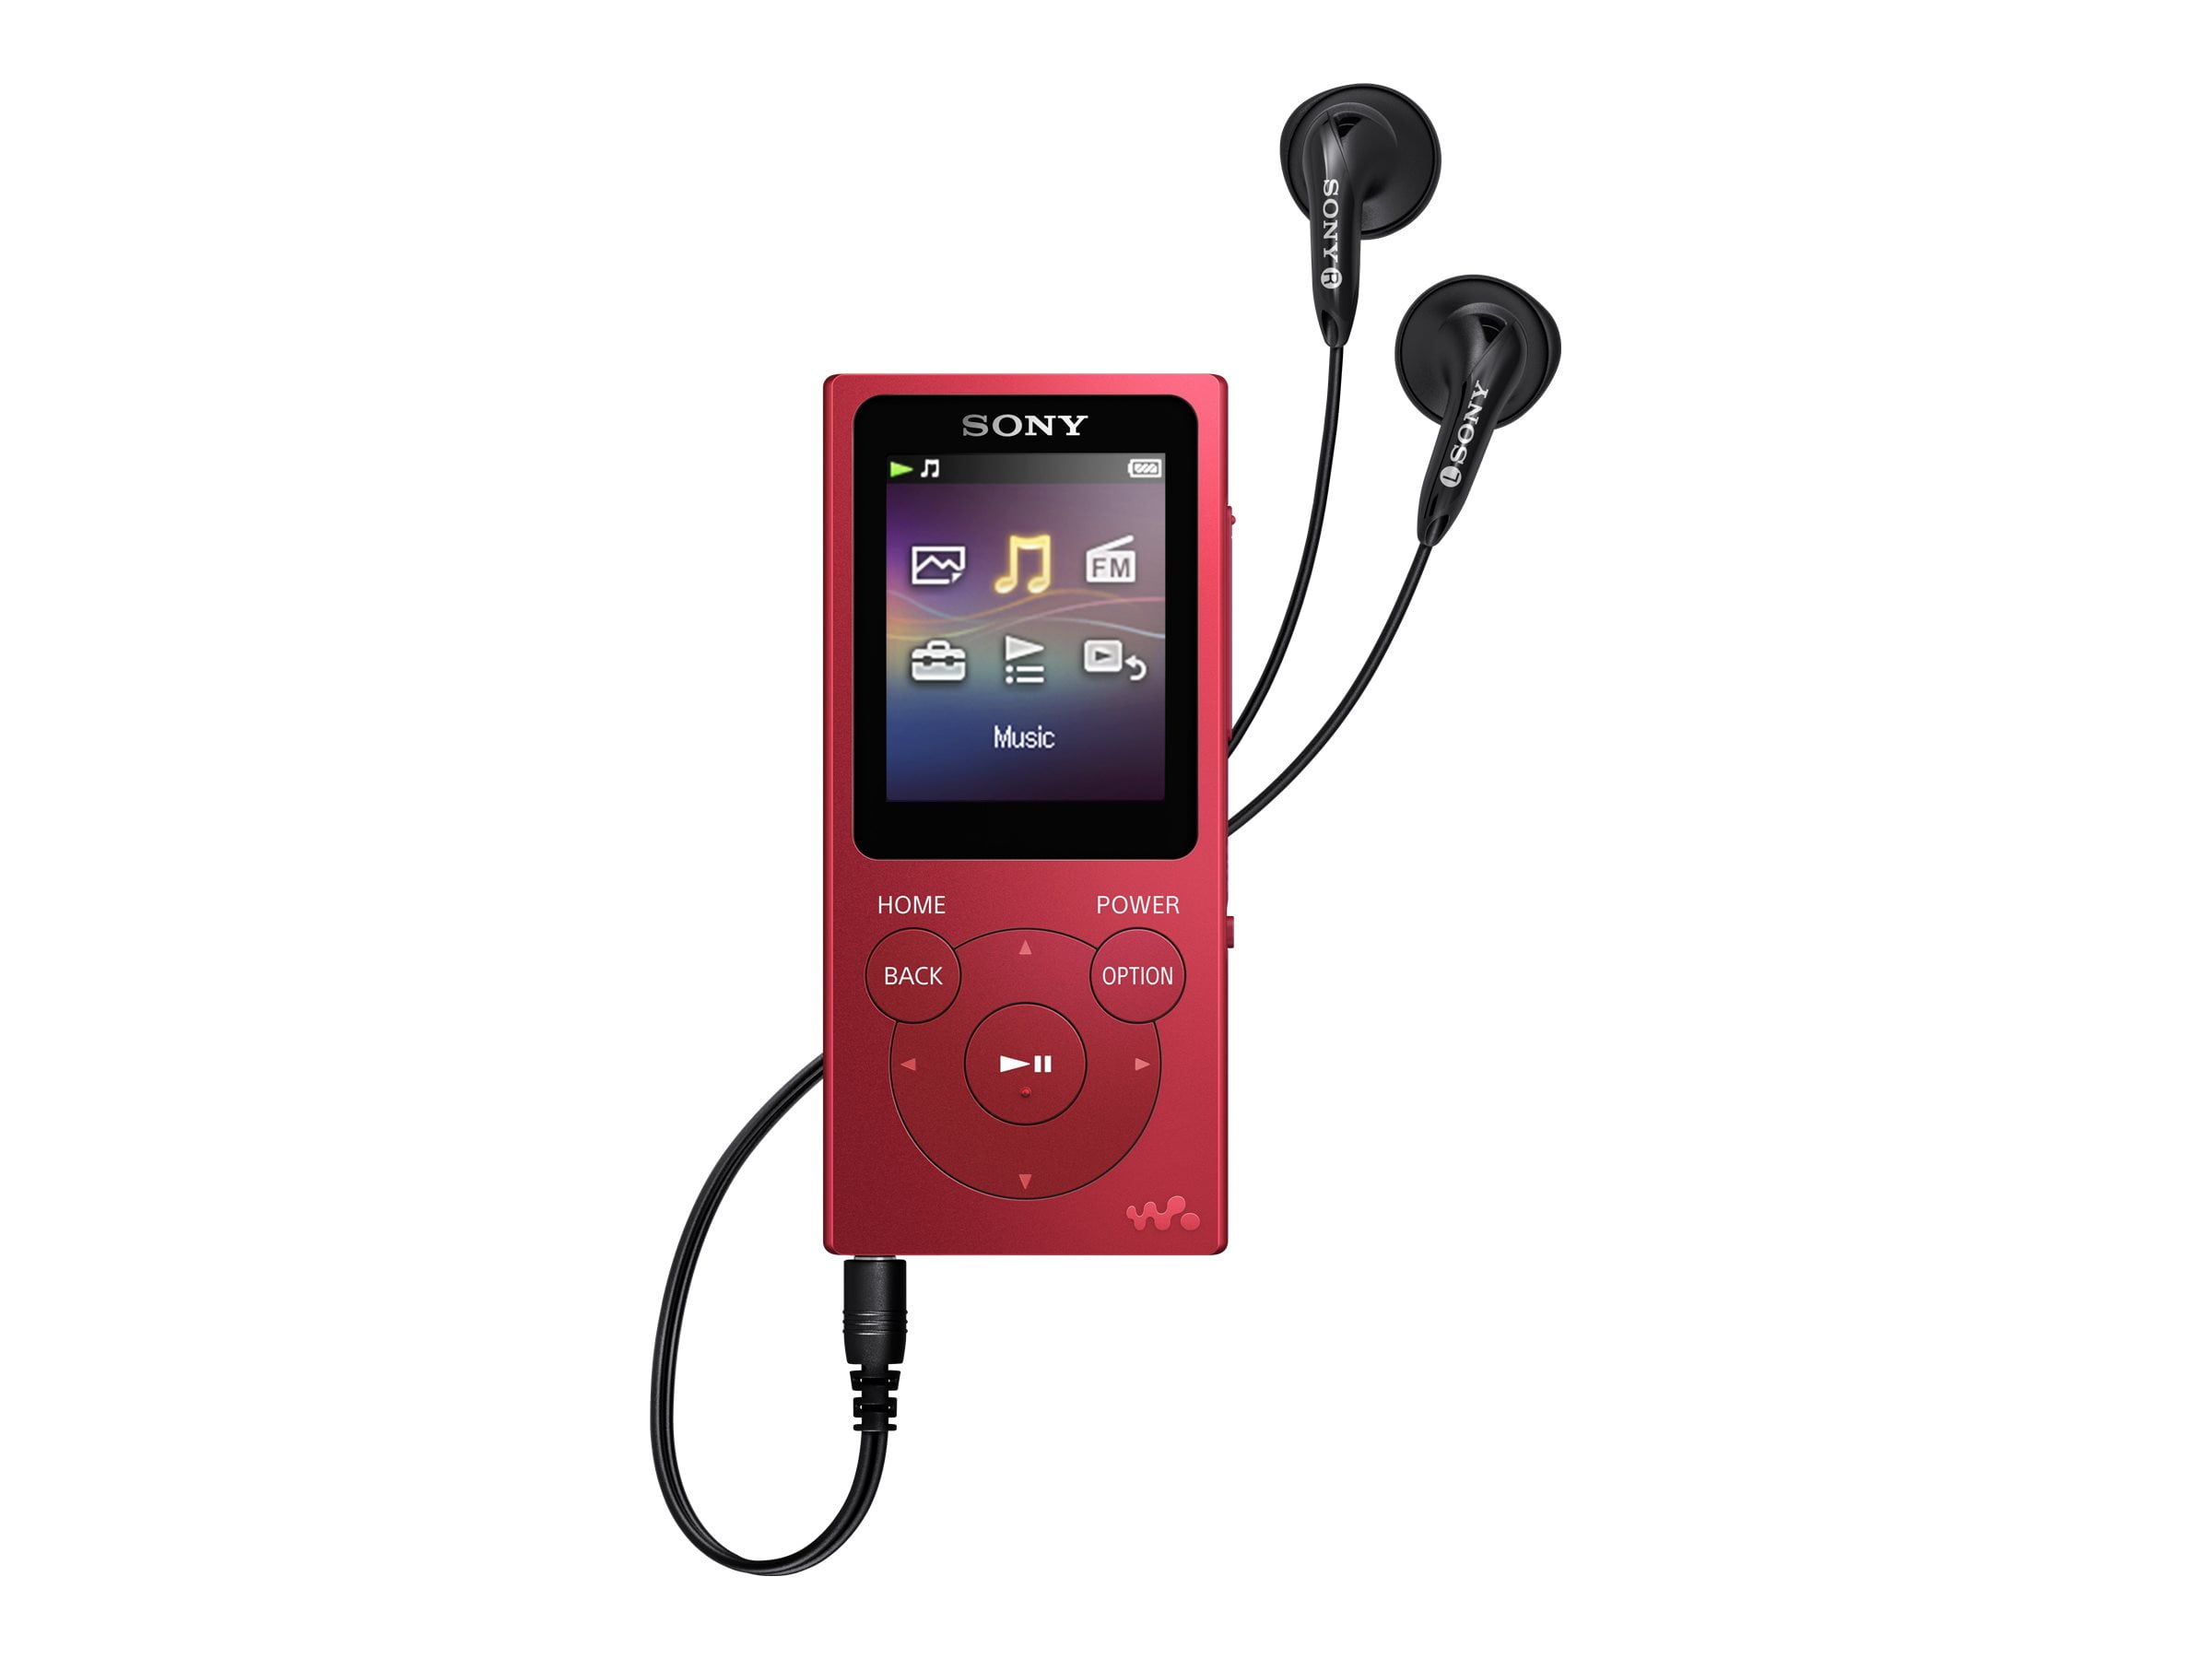 Sony Walkman NW-E395 16GB* MP3 Player Red NWE395/R - Best Buy